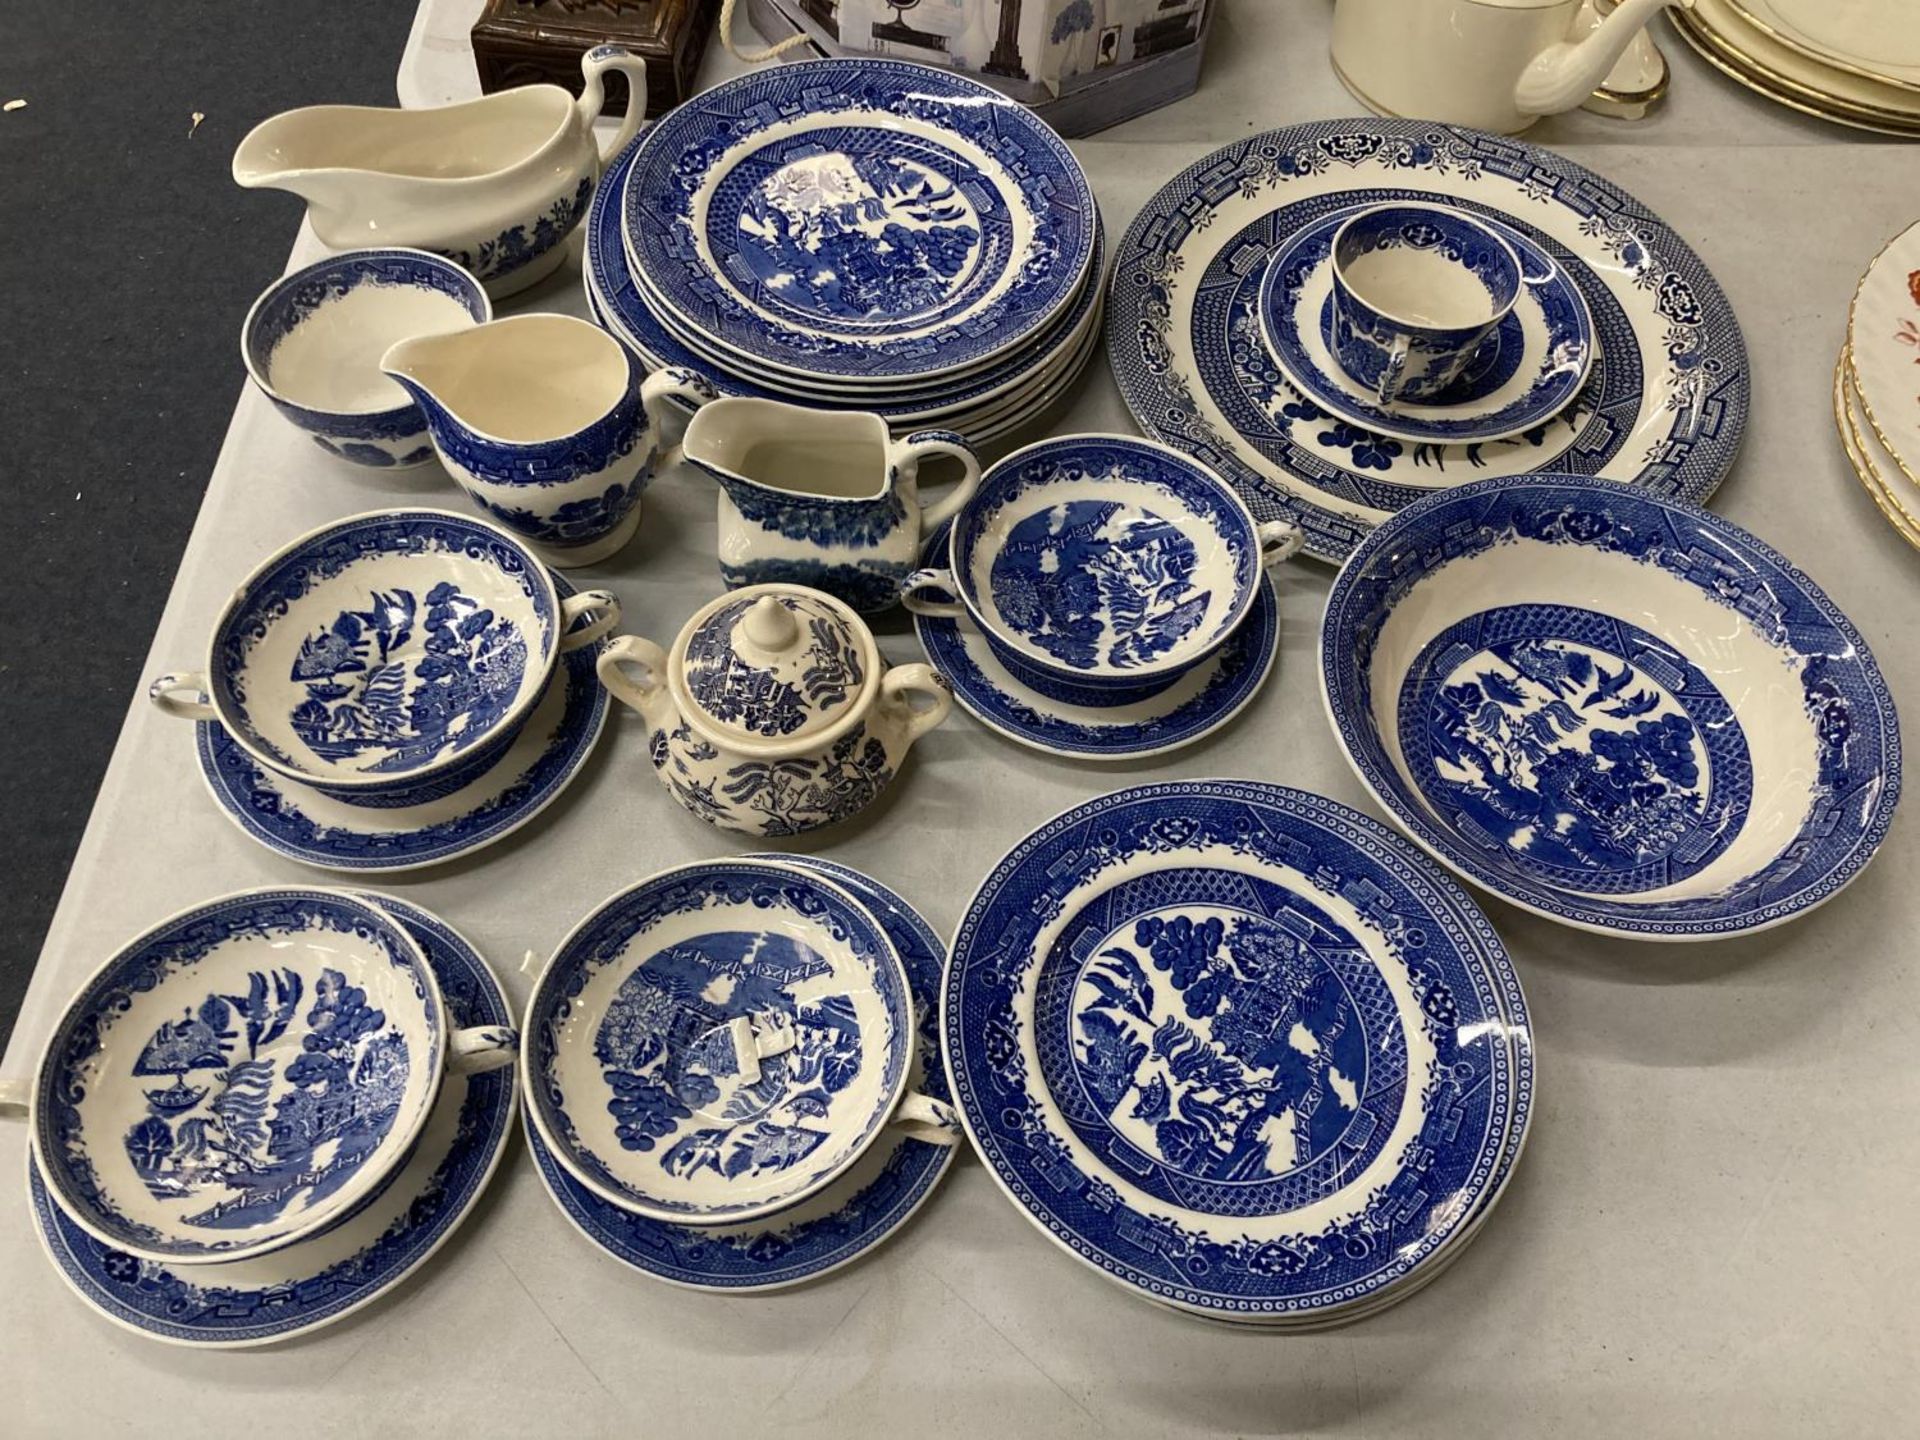 A VICTORIA PORCELAIN 'WILLOW' PART DINNER SERVICE TO INCLUDE PLATES, HANDLED BOWLS, JUGS, SAUCE